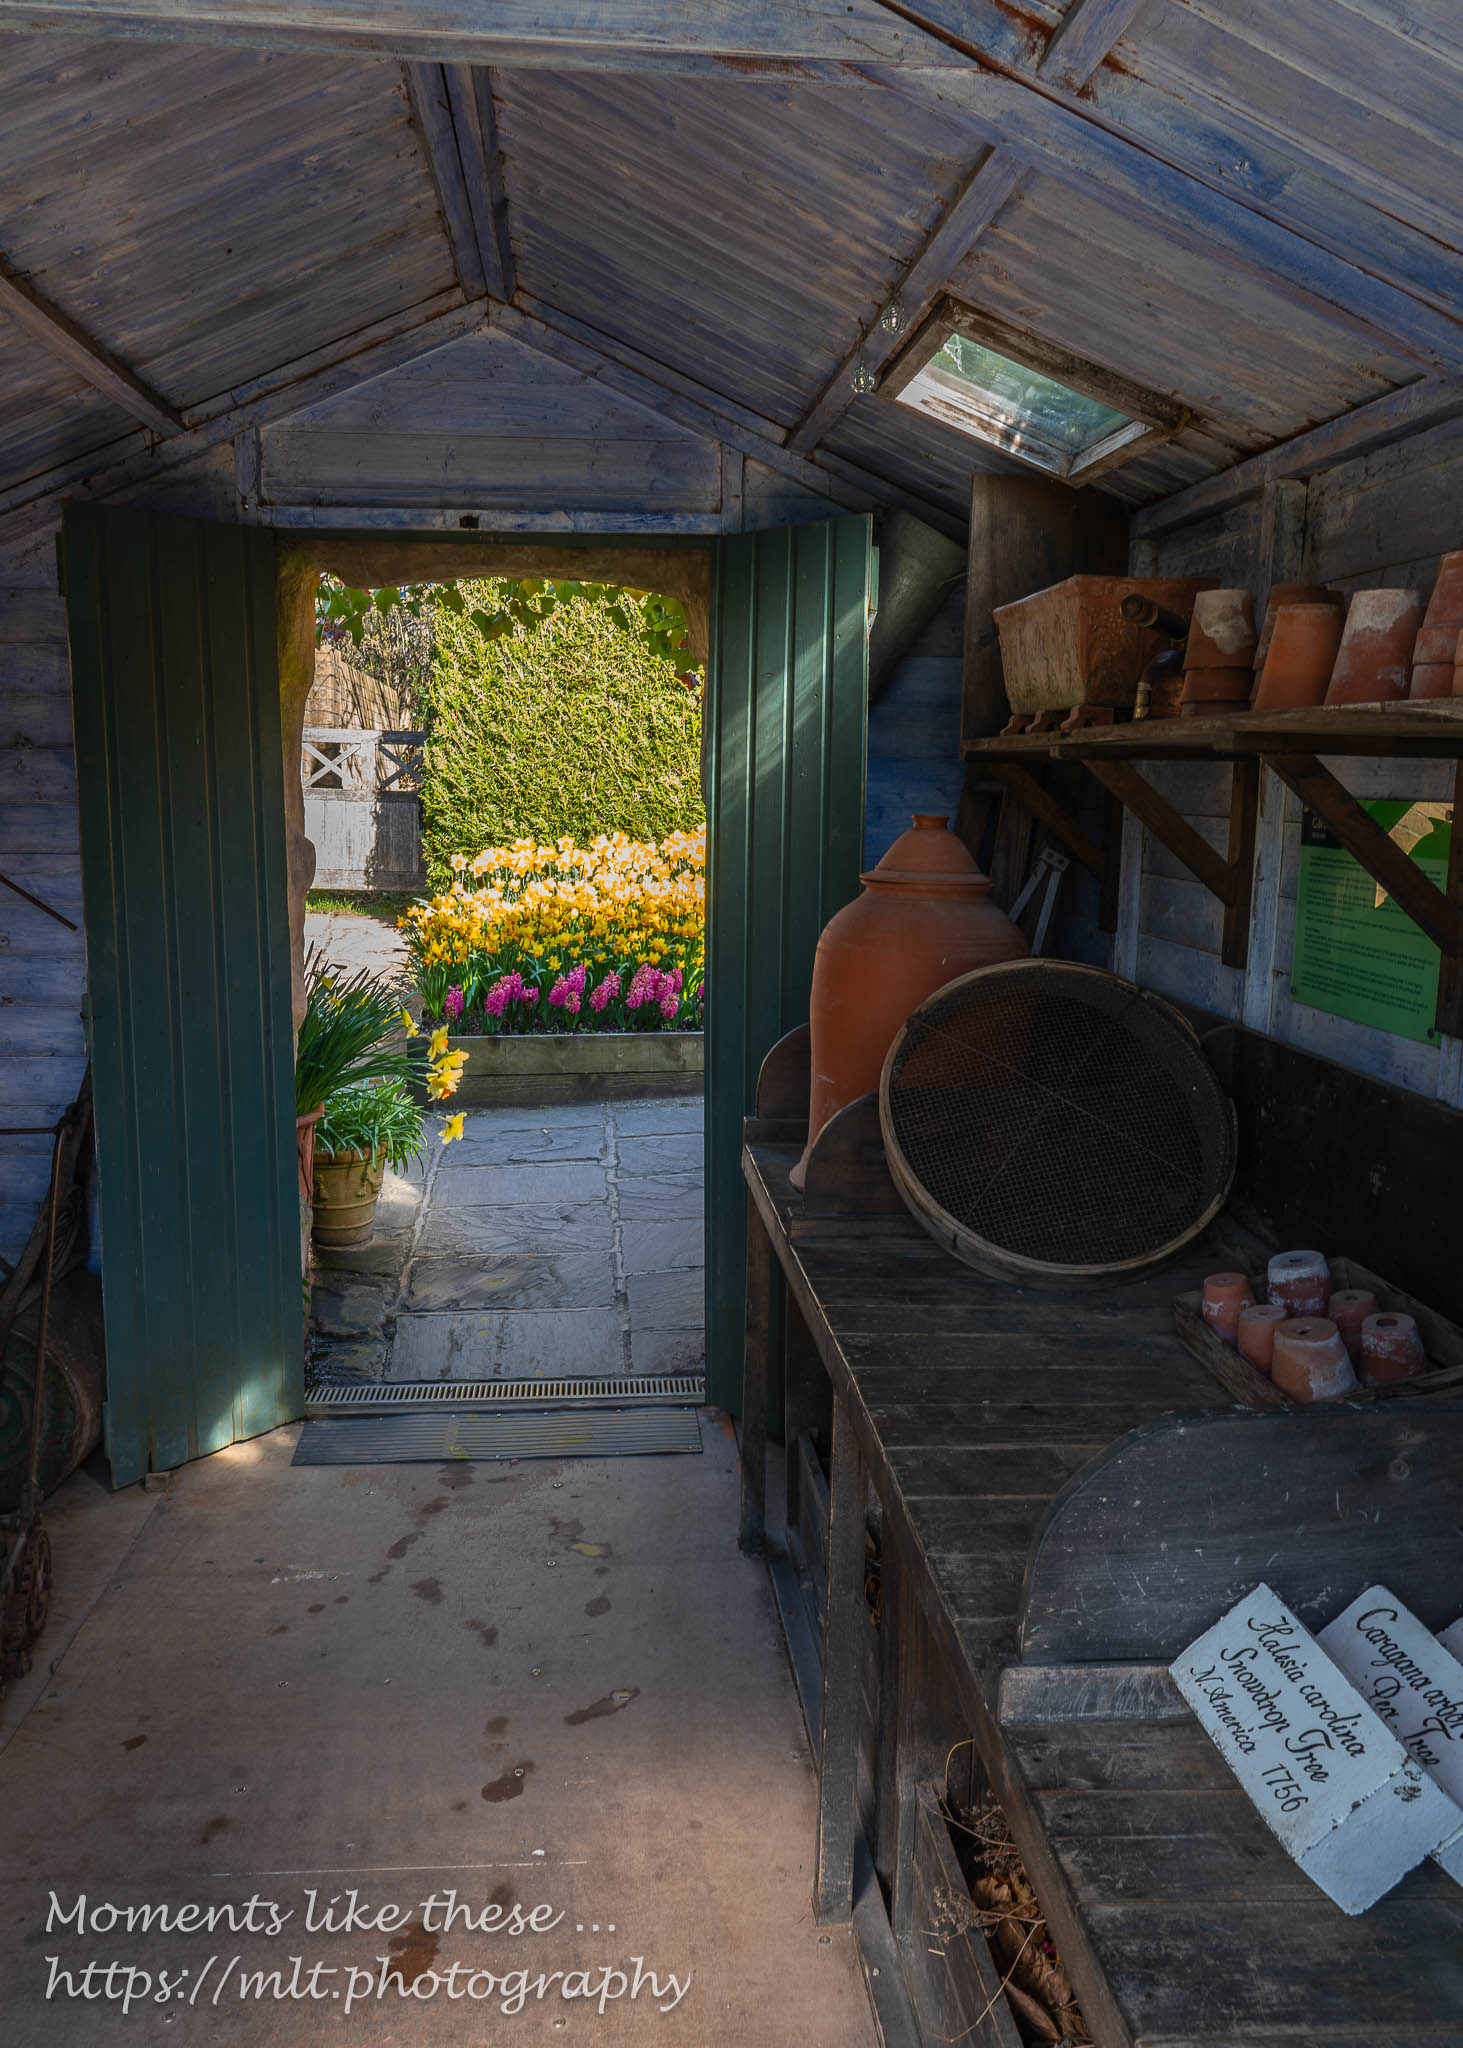 The Potting Shed